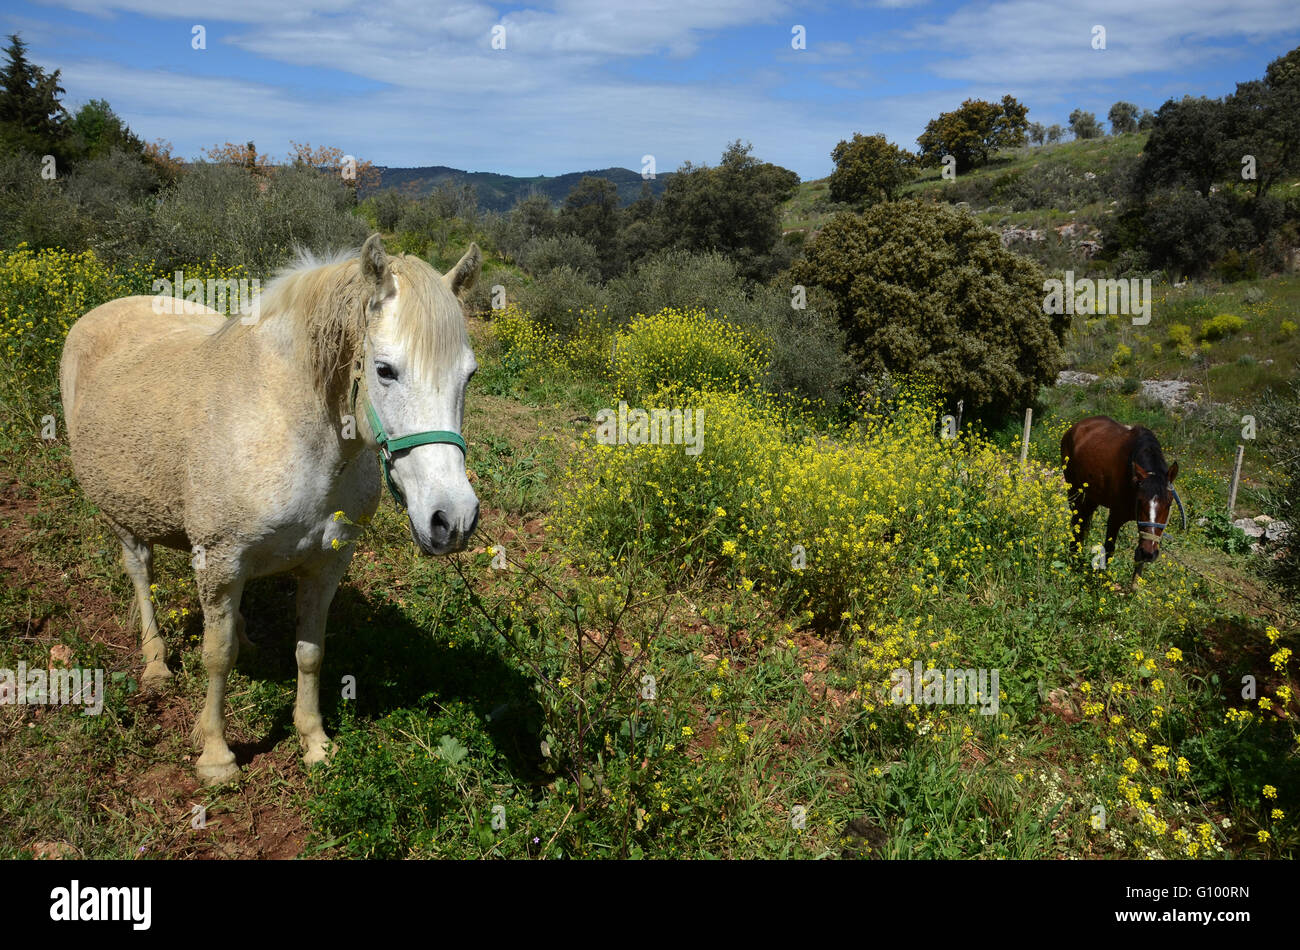 Andalusian countryside near Arriate Spain Stock Photo